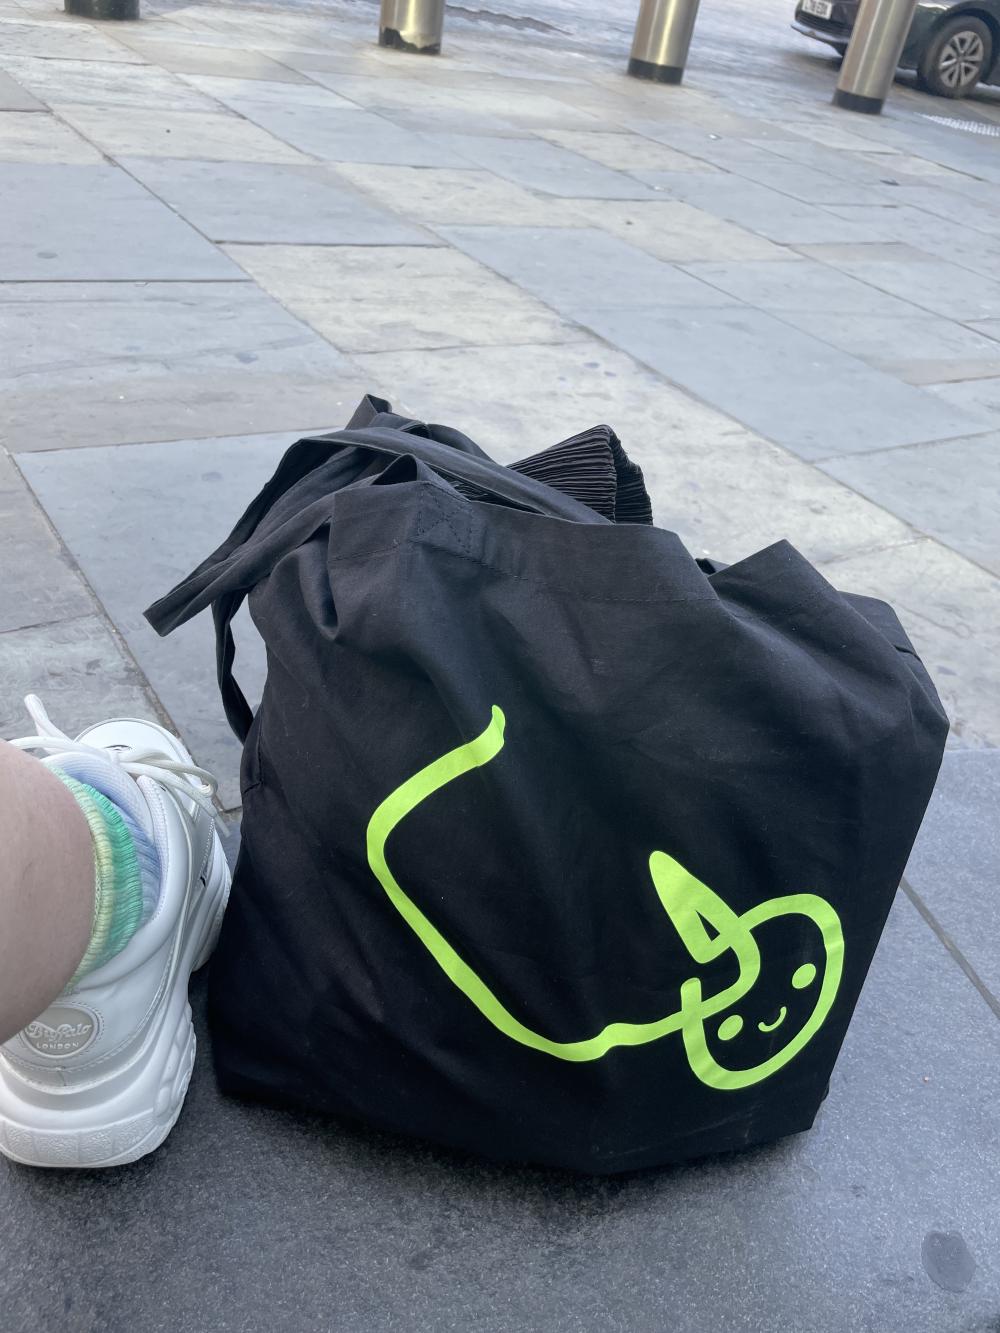 the white pube logo on a black tote bag while i wait for a taxi to take me to a friend's house in london